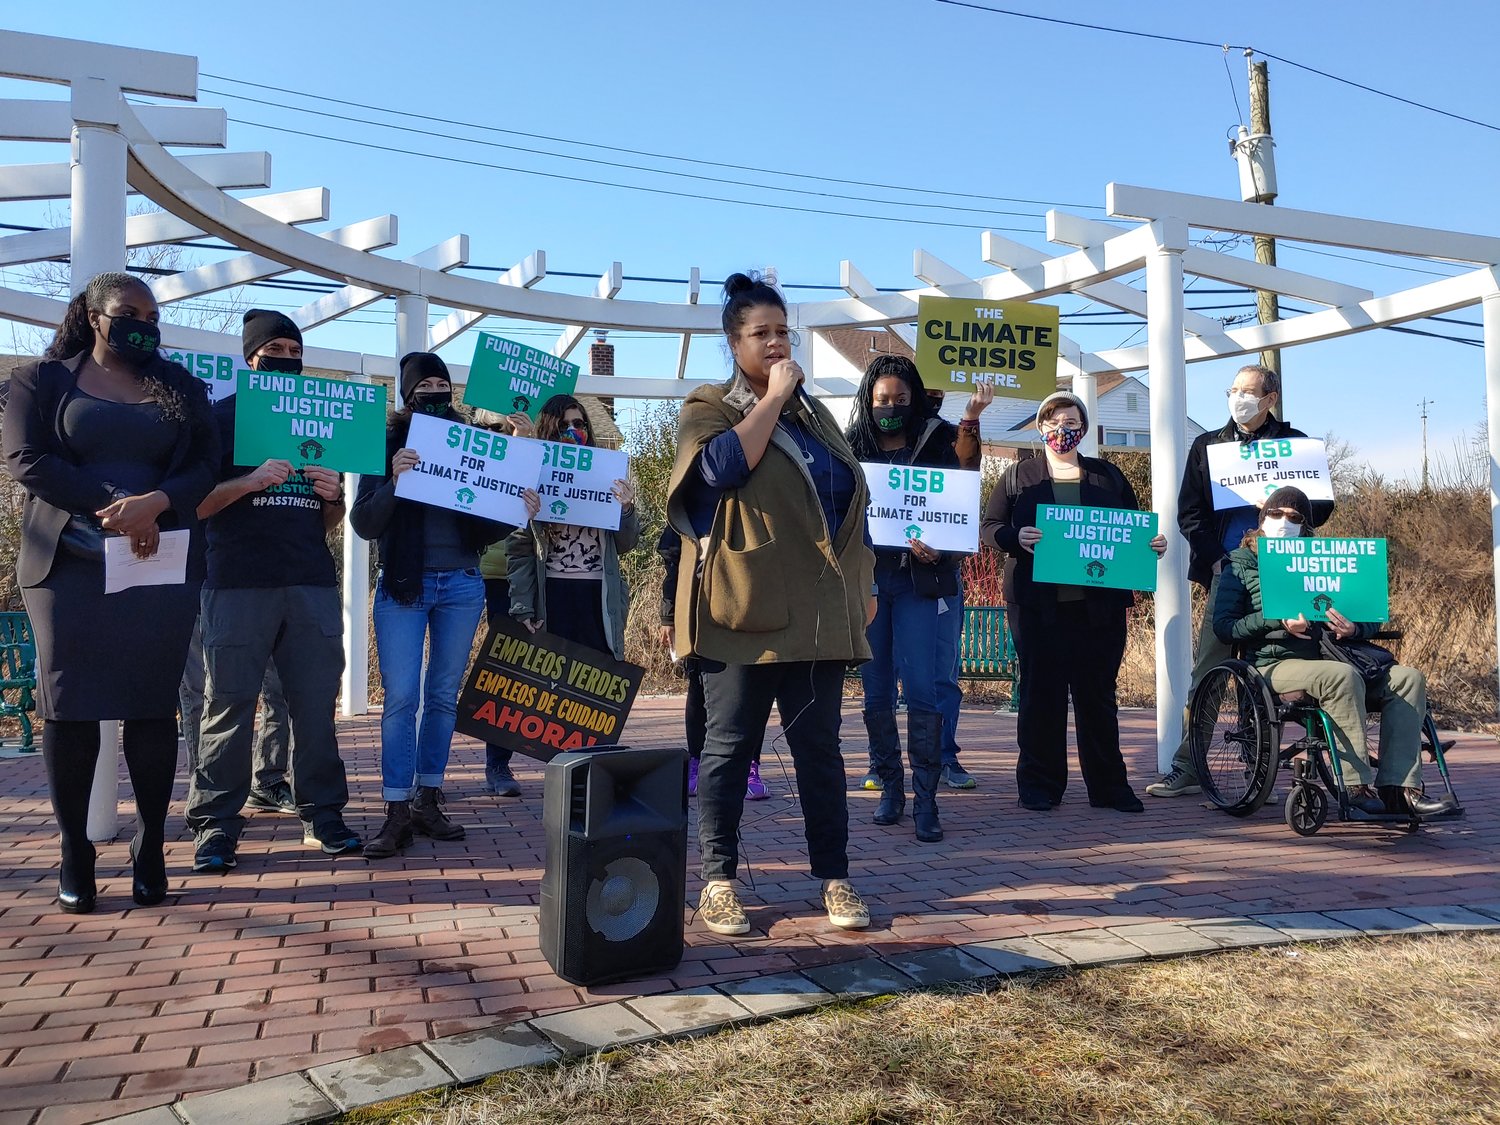 Activists from NY Renews, joined by State Assemblywoman Michaelle Solages, above, rallied in Mill Brook Park for major budget spending for climate action.